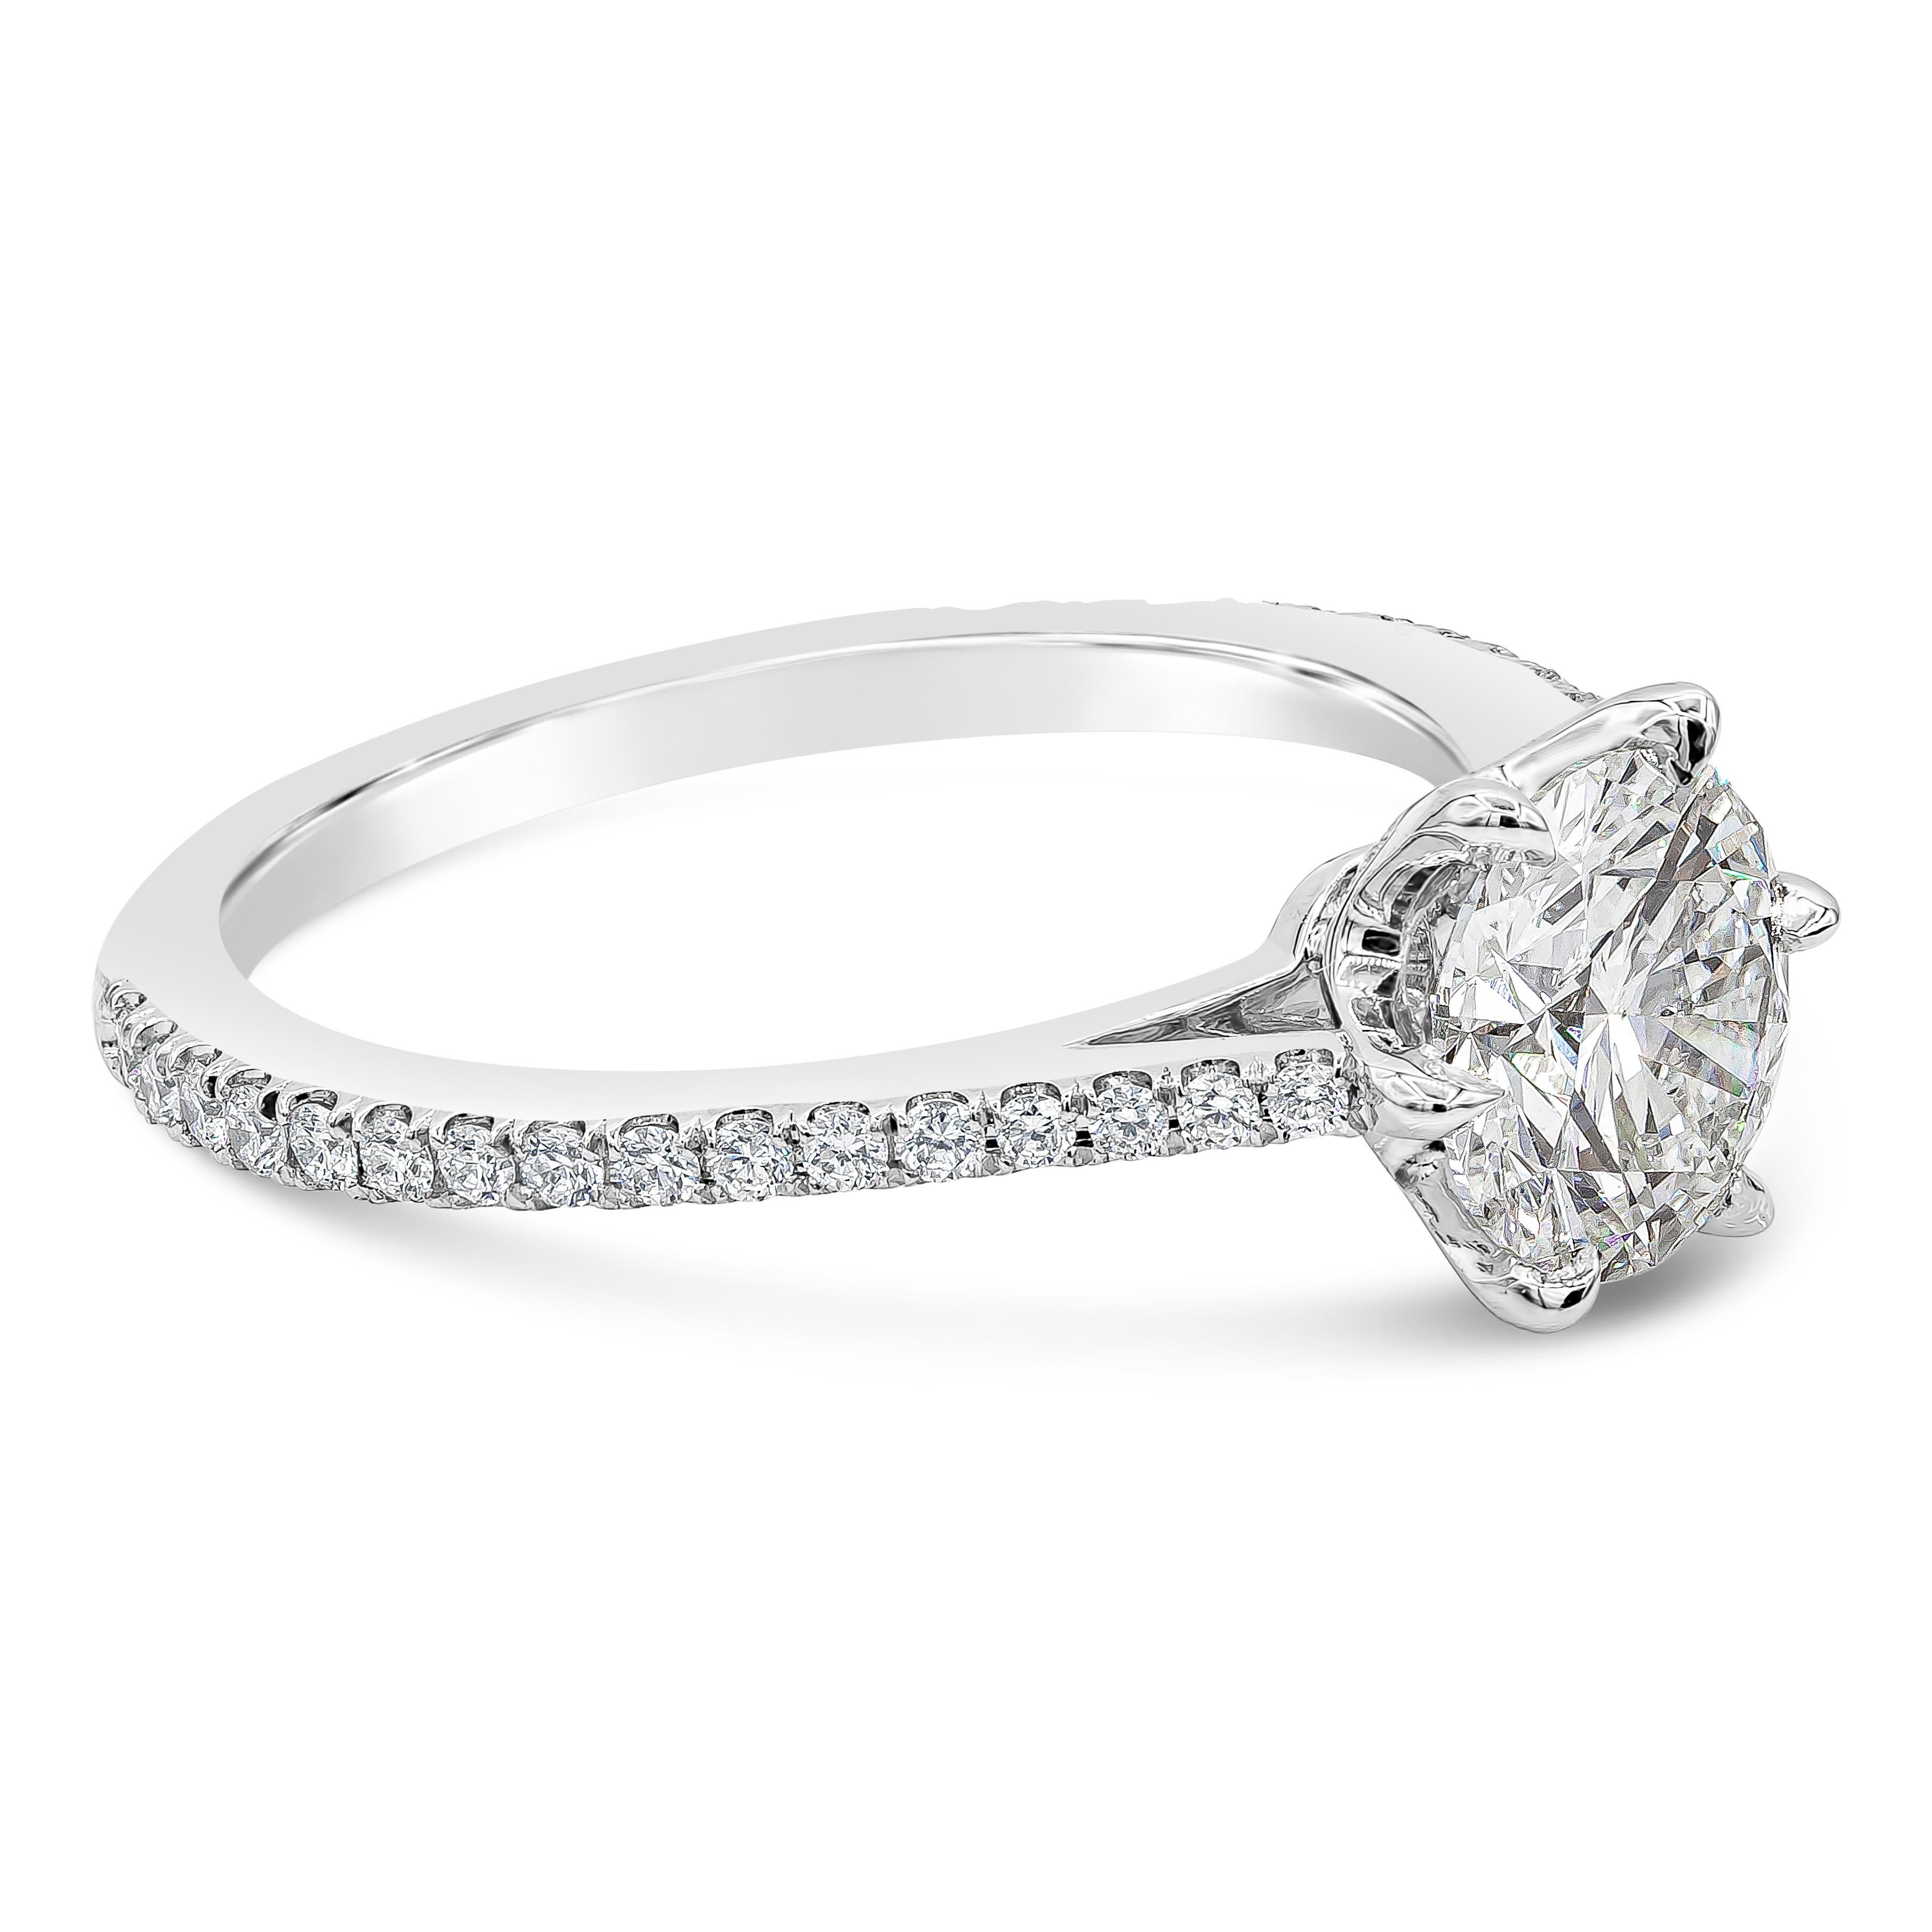 Timeless engagement ring style showcasing a 1.20 carats round brilliant diamond certified by GIA as G color, SI2 in clarity. Set in a six prong setting made in platinum. The mounting is accented with round brilliant diamonds weighing 0.37 carats